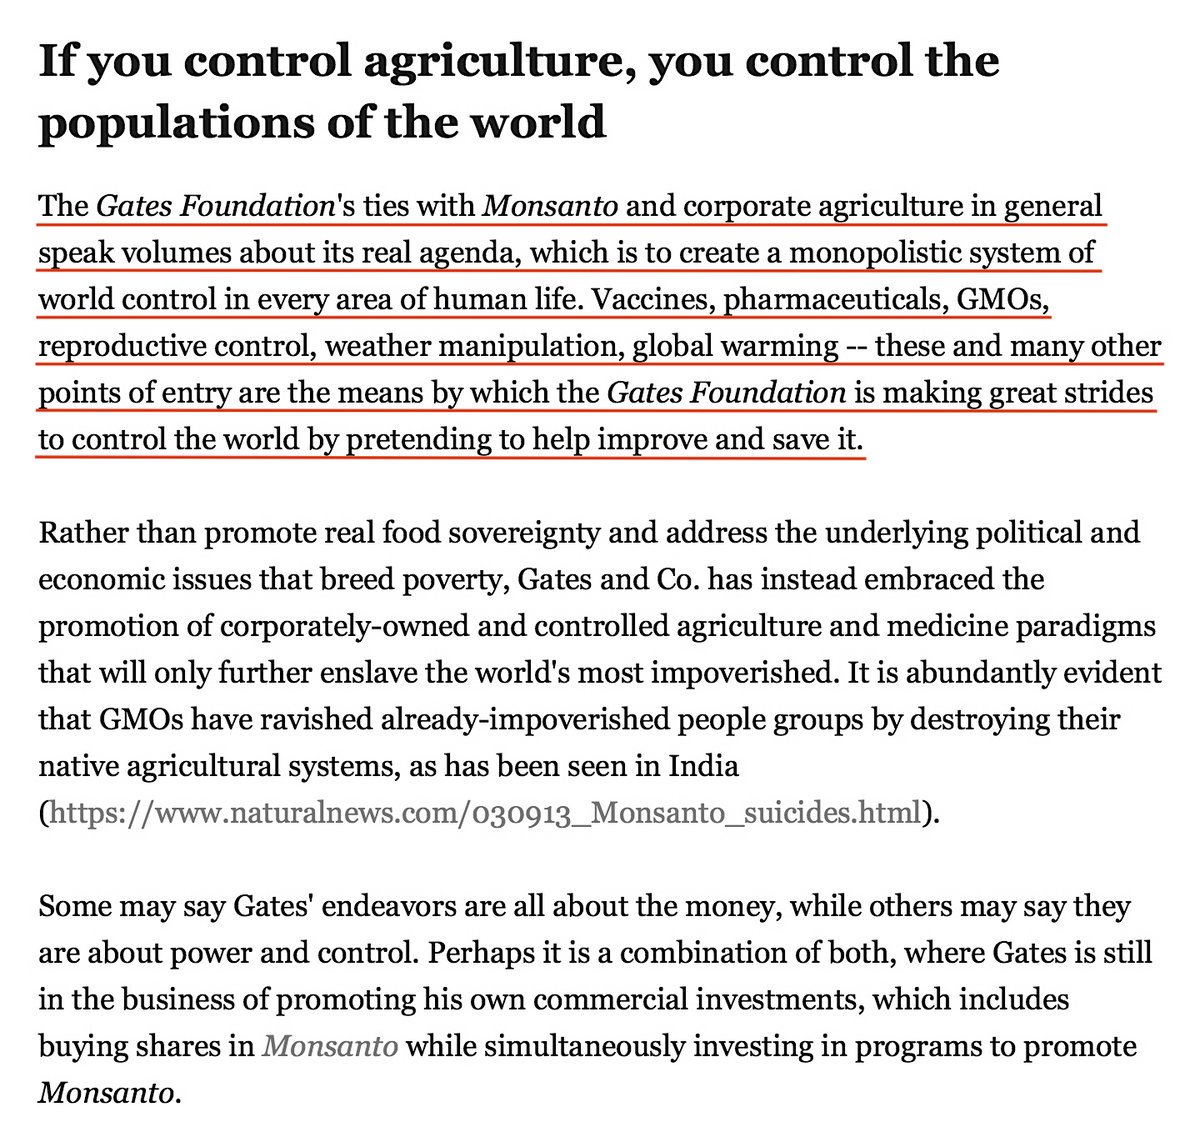 What's The Agenda?Create A Monopolistic System Of World Control In Every Area Of Human Life. Vaccines, Pharmaceuticals, GMOs, Reproductive Control, Weather Manipulation, Global Warming, And More. https://www.naturalnews.com/035105_Bill_Gates_Monsanto_eugenics.html #QAnon  #Gates  #UN2030  @potus